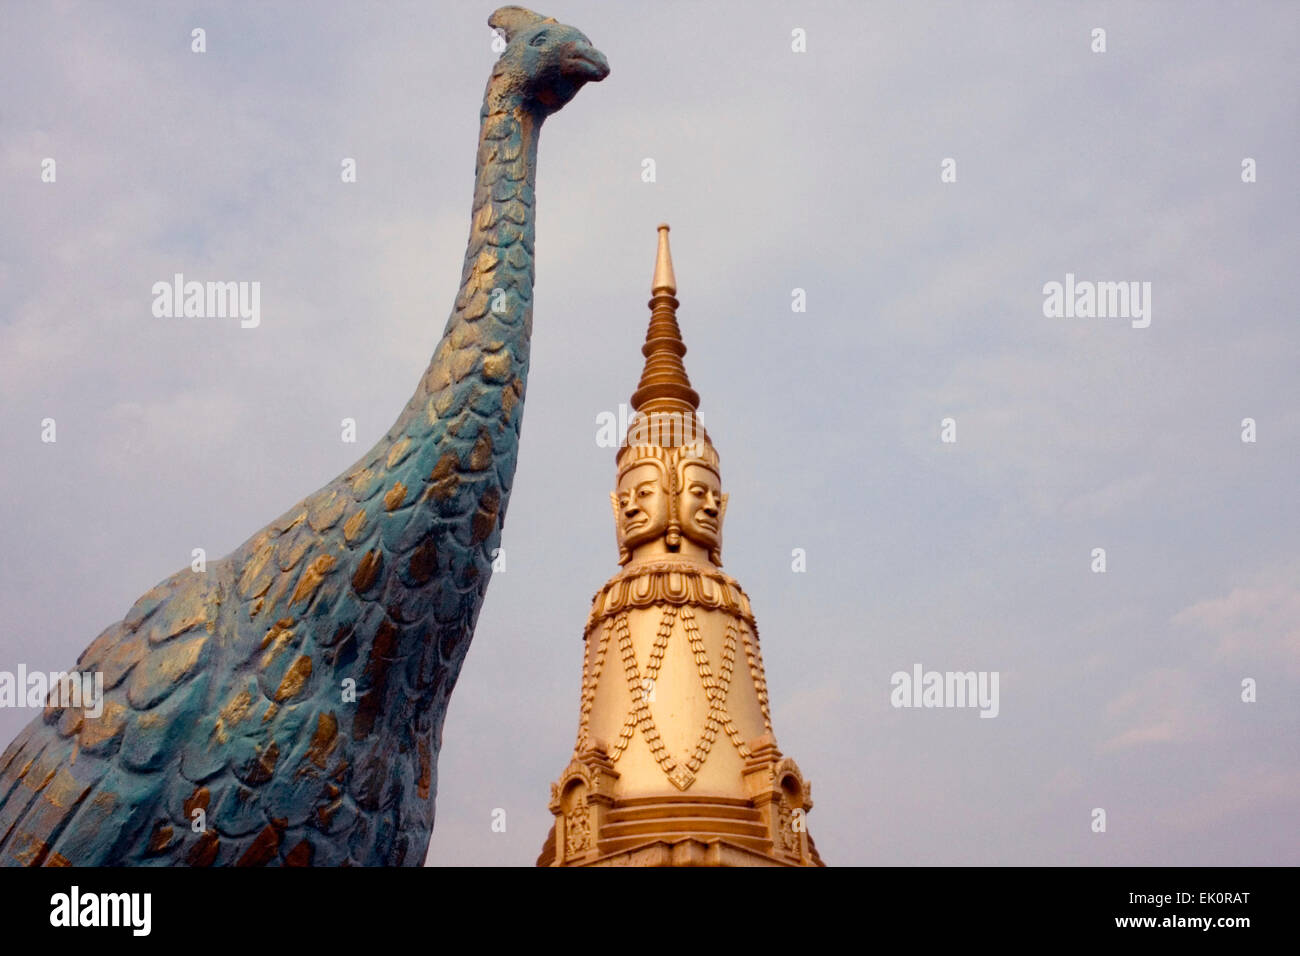 A golden stupa and a peacock sculpture are on display at a temple in Kampong Cham, Cambodia. Stock Photo